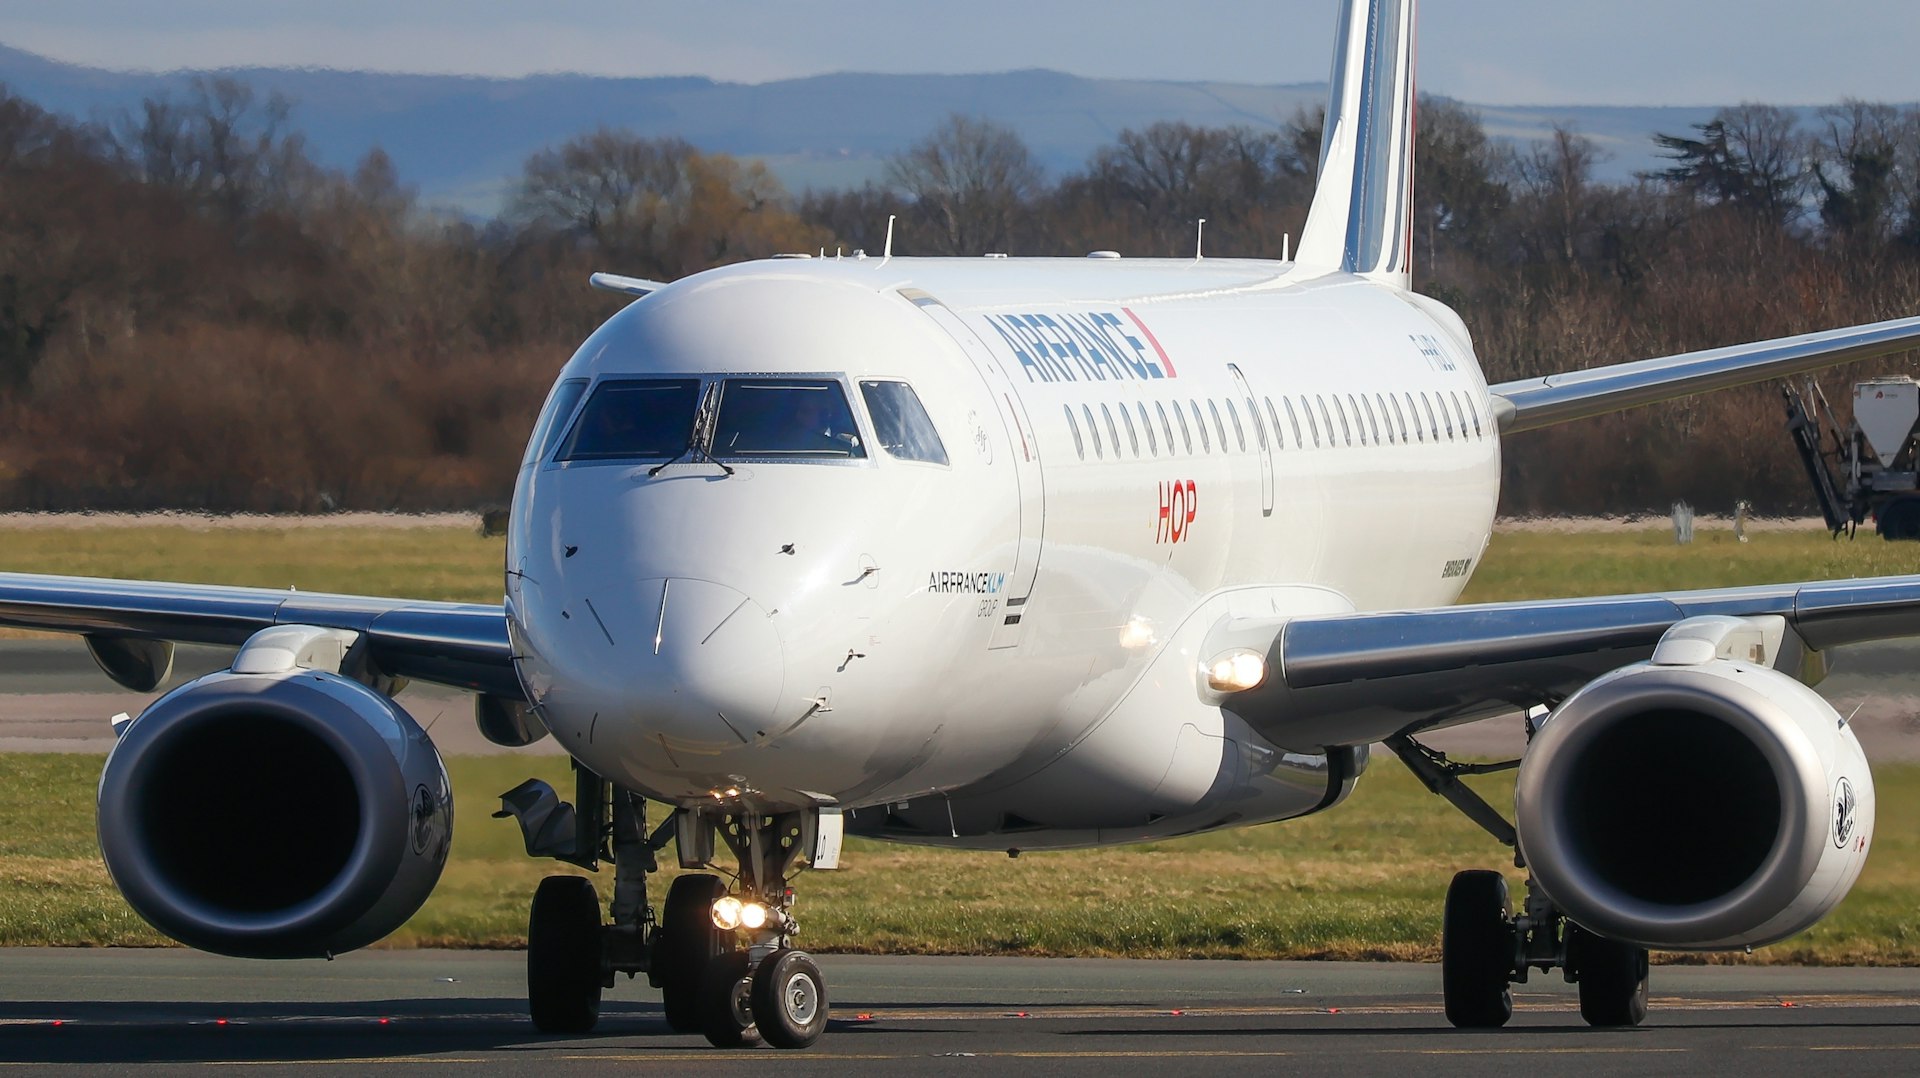 An Air France Embraer 170 taxiing on the runway